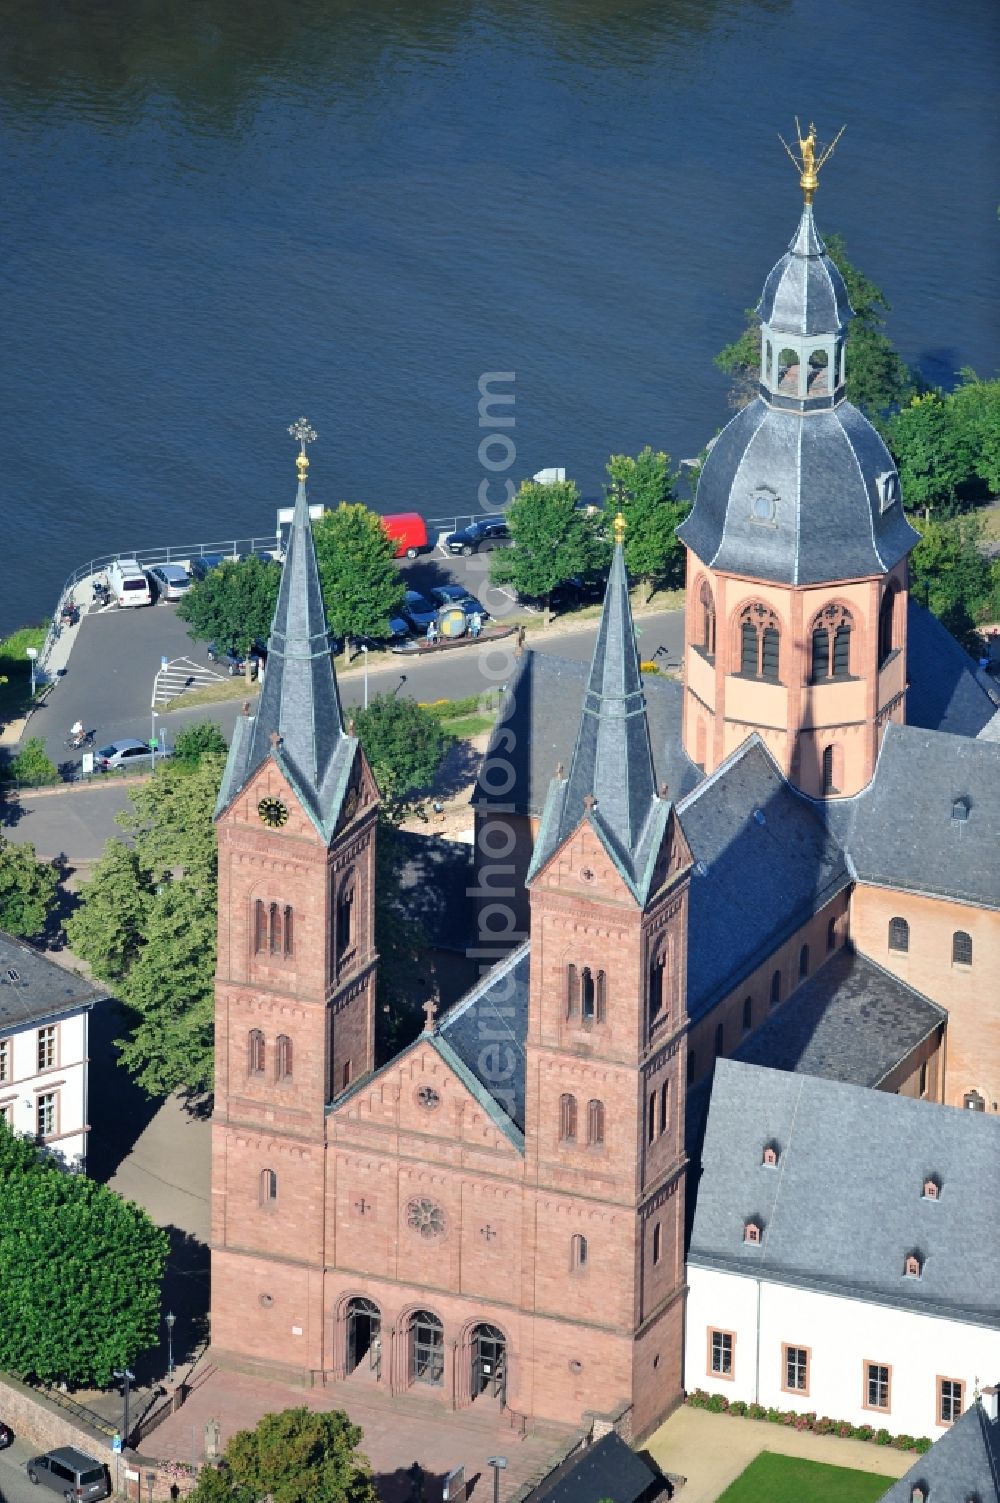 Seligenstadt from above - View of the Basilica of St. Marcellinus and Peter in Seligenstadt in Hesse. It is the remains of a monastery that was founded in 834, and has a garden. After secularization of the abbey in 1803, the Basilica became a catholic parish church in 1812